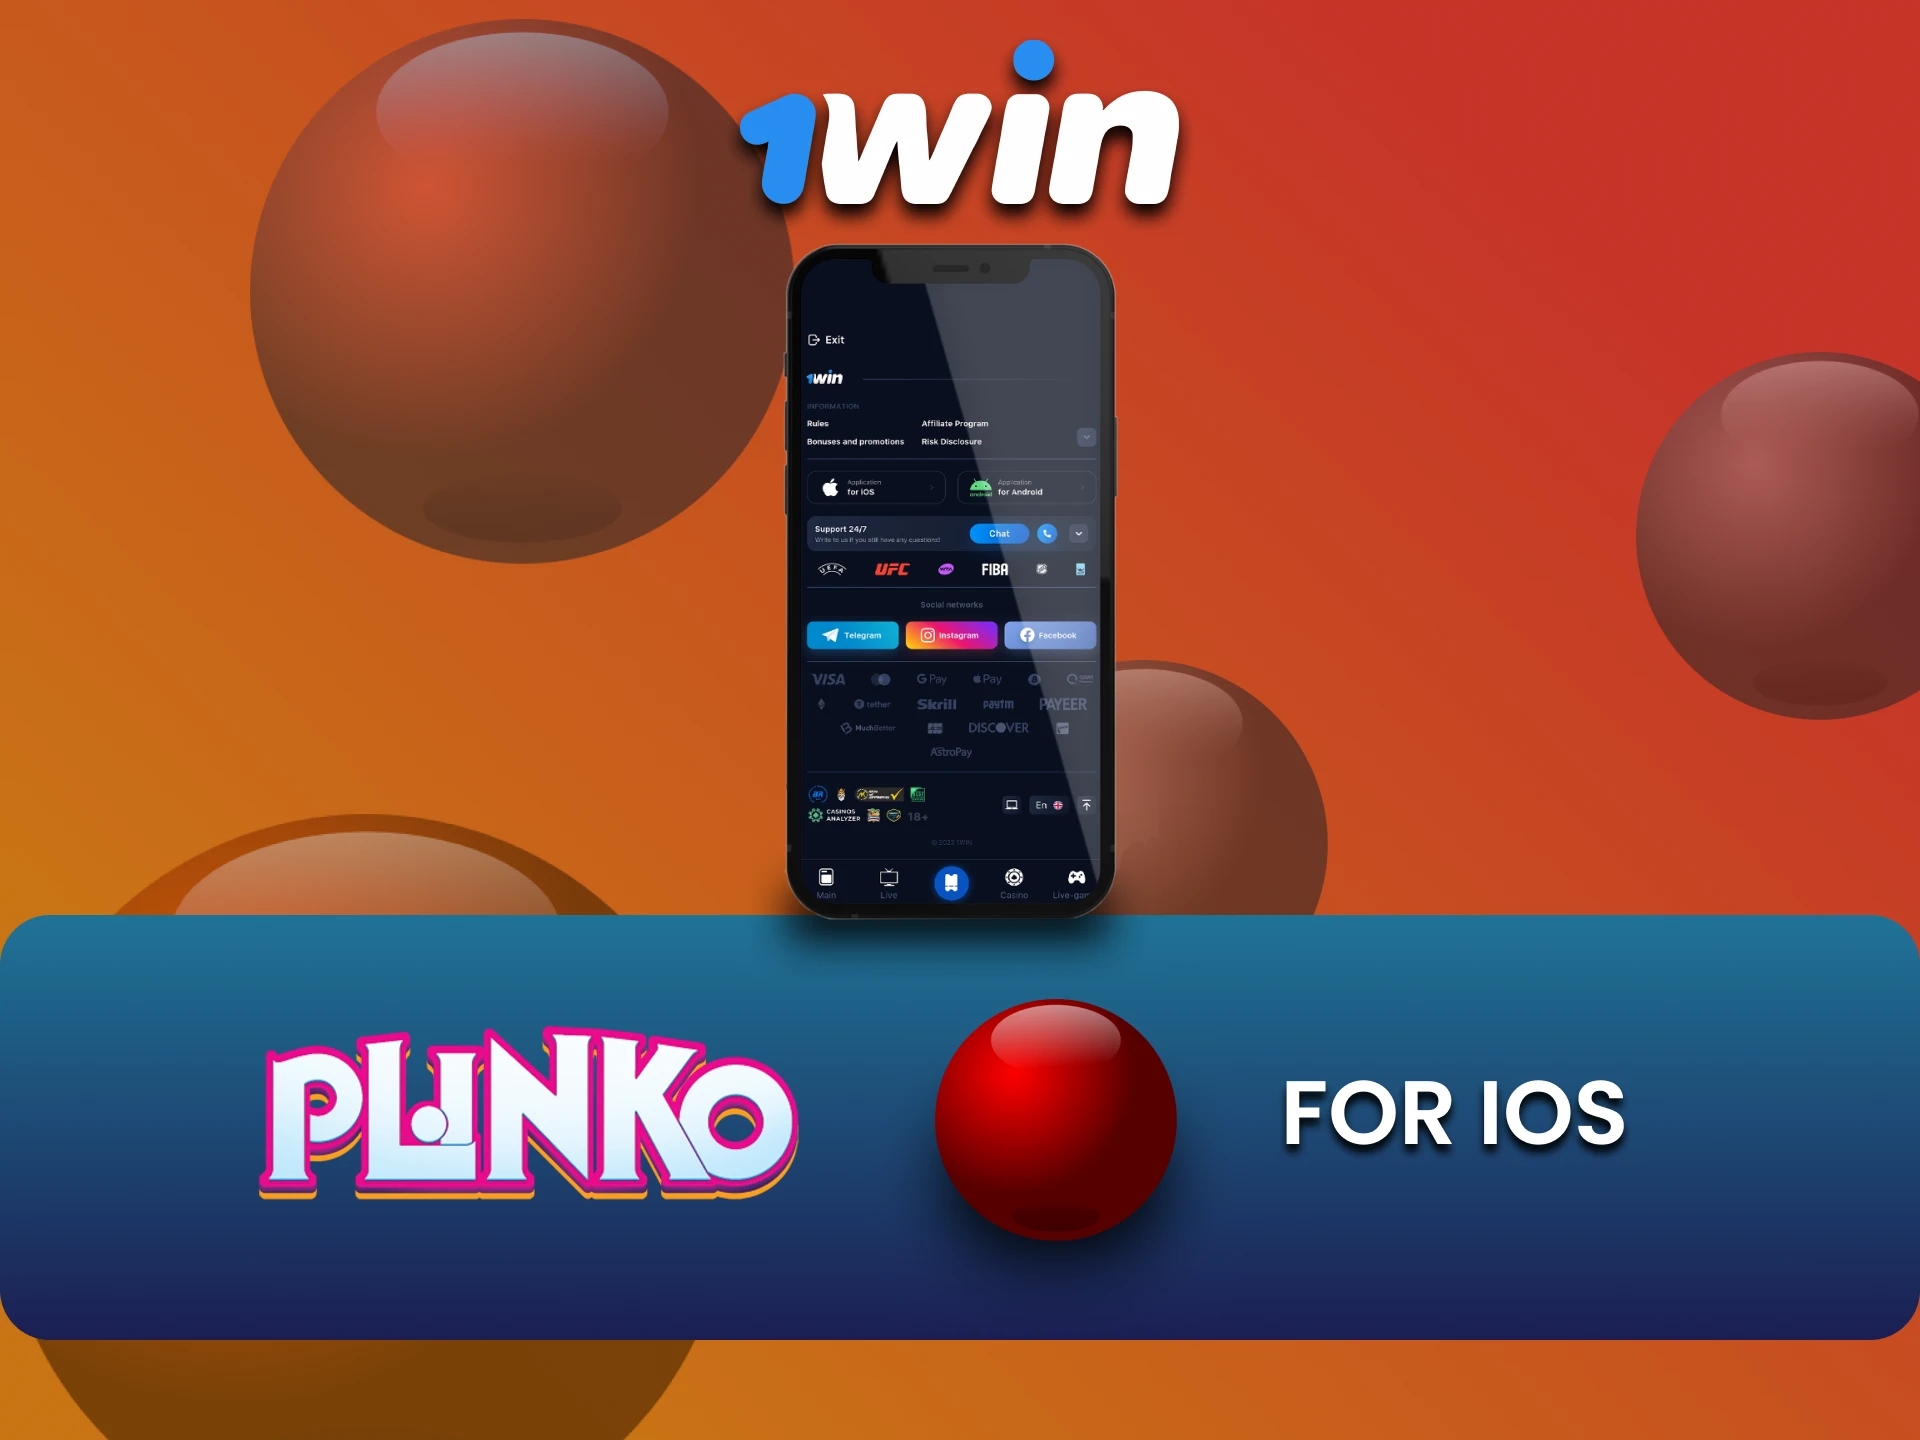 Download the 1win app on iOS to play Plinko.